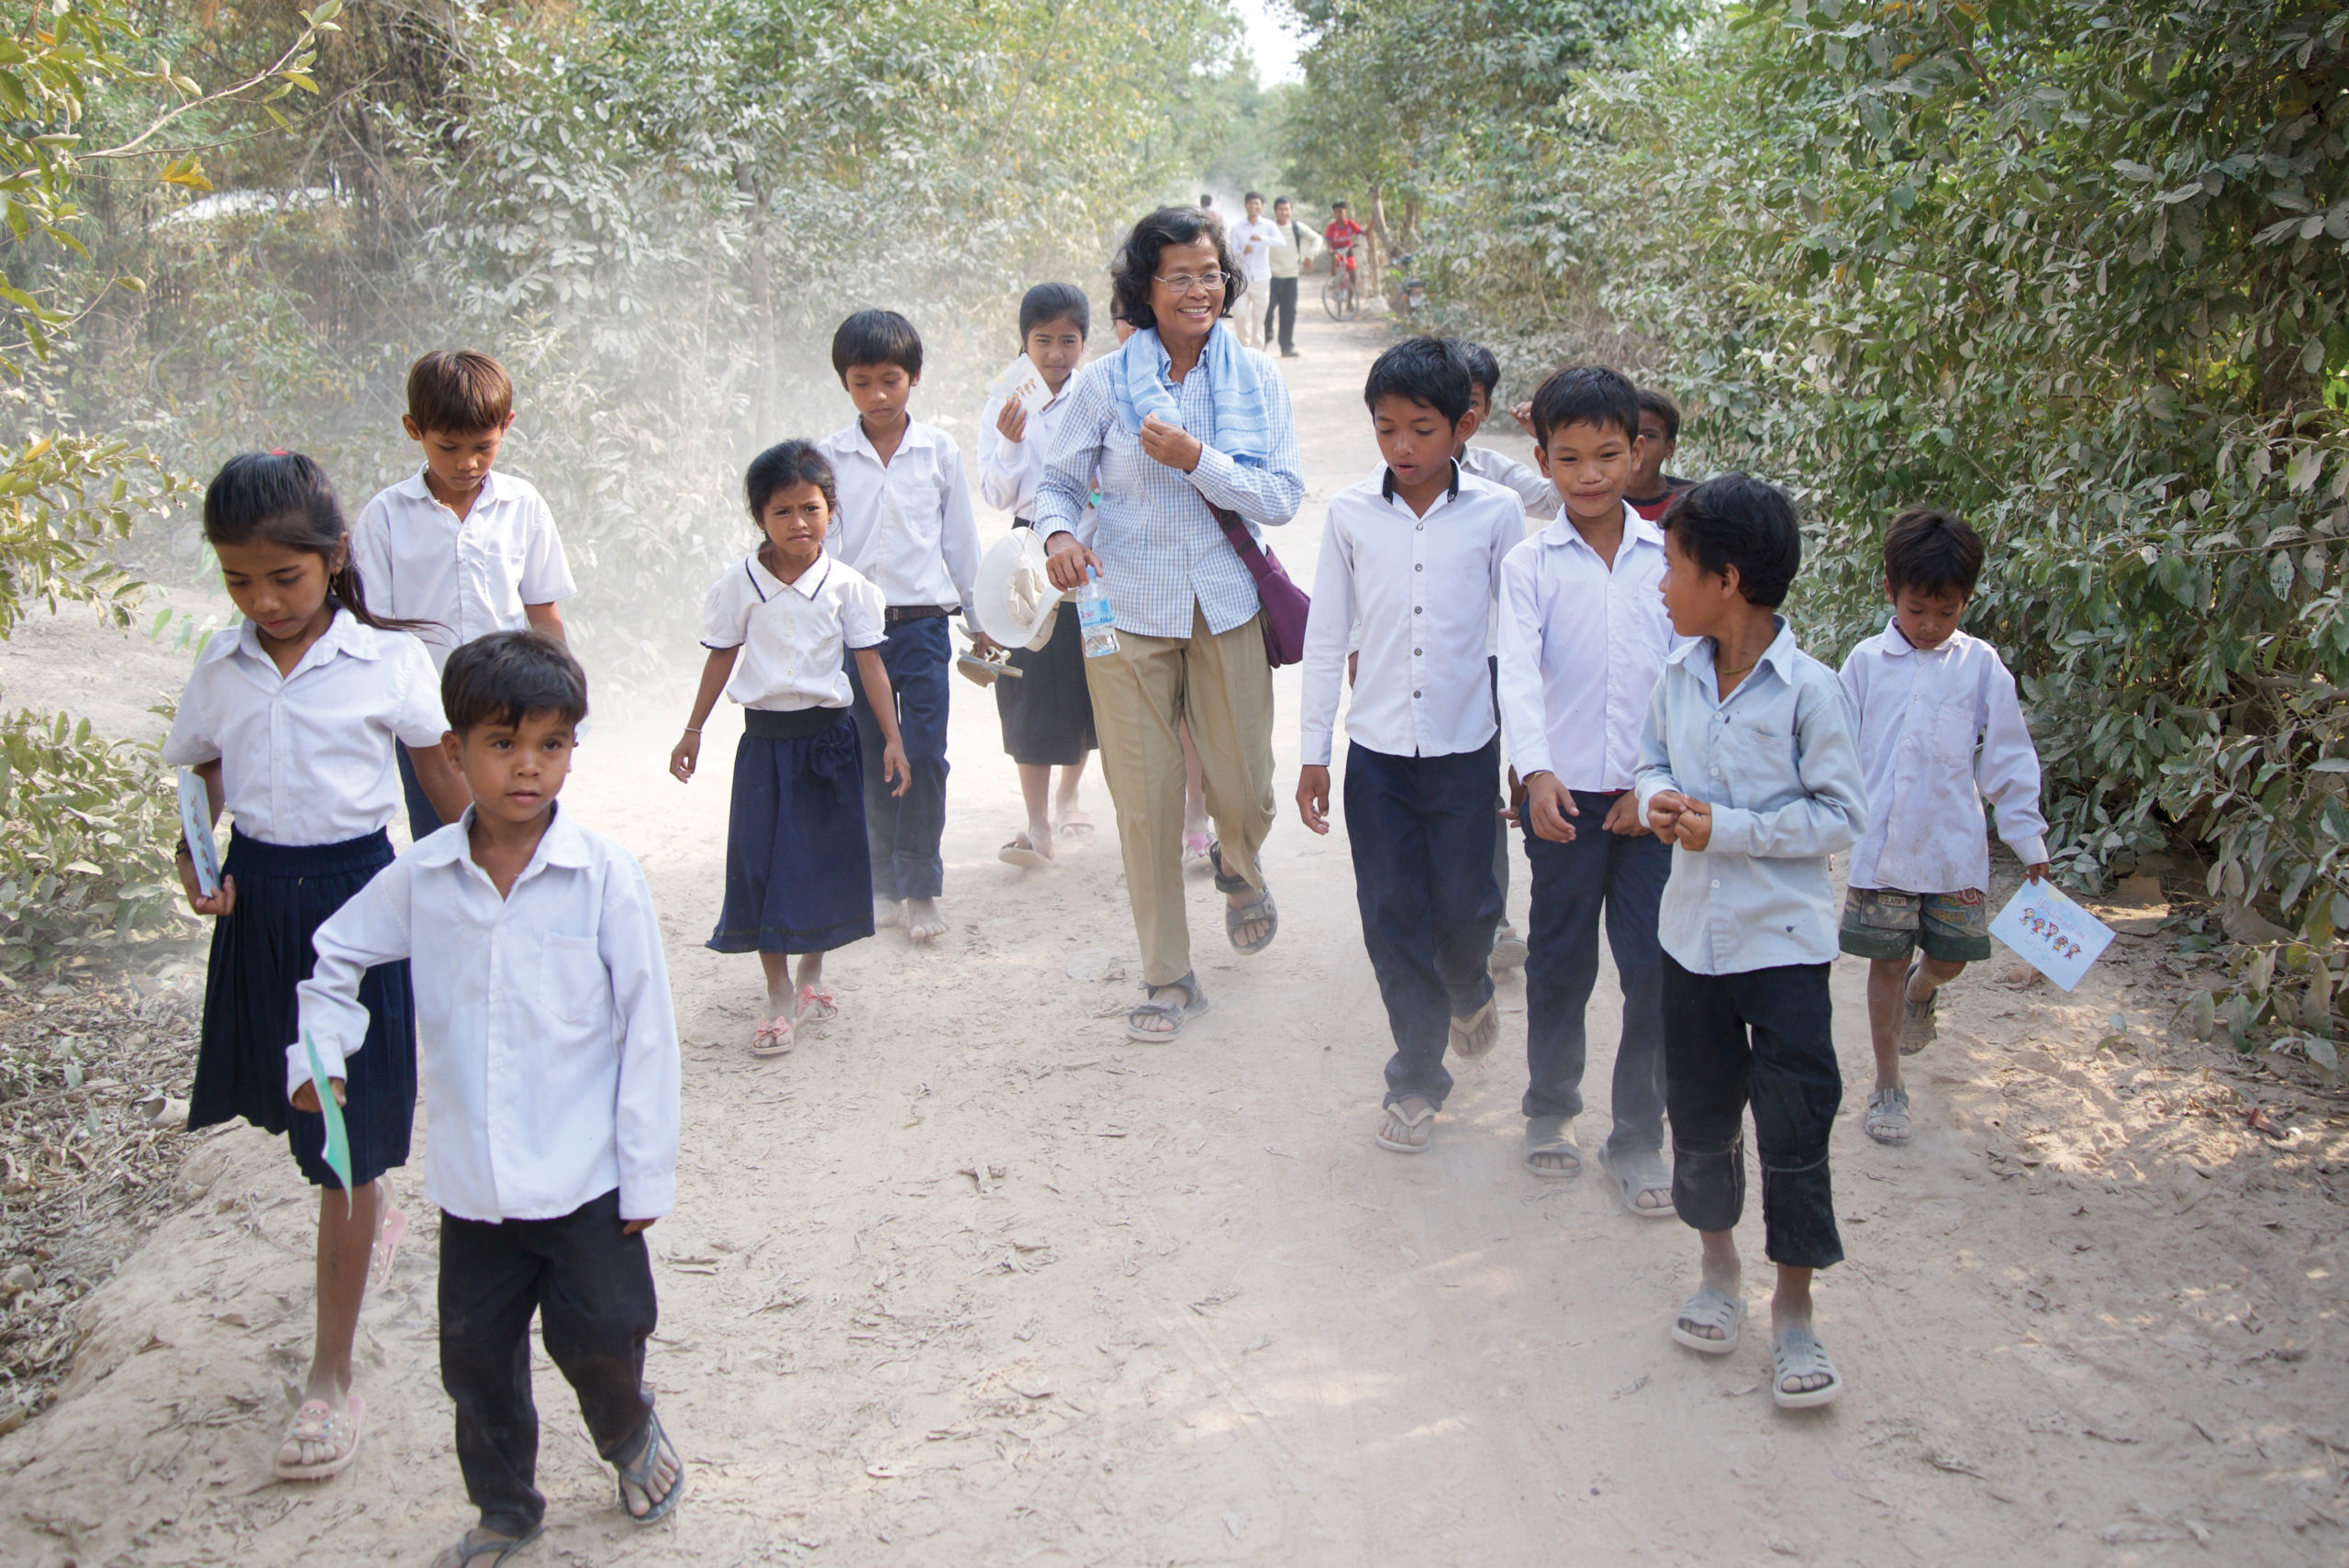 Children walking along a dirt path. Cambodia sponsorship helps educate these children.